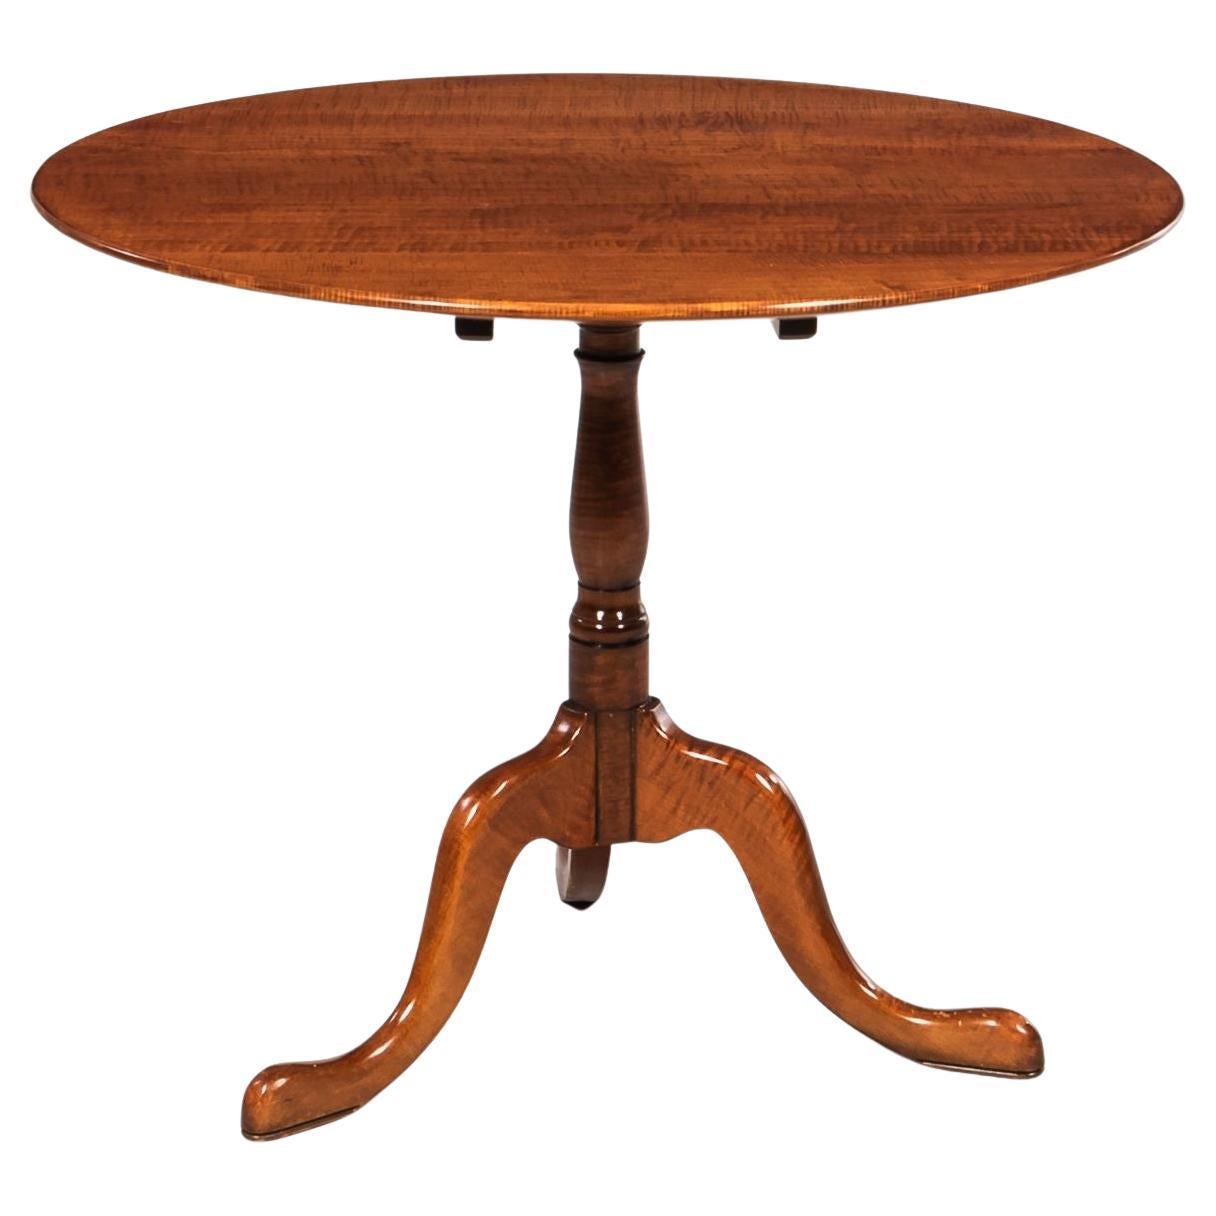 Large 18th-Century antique, Queen Anne-style Tiger Maple Tilt-top Tea Table, with cabriole legs and attractive color and pattern.
Measures: height 28 1/2, diameter 33 in.
 